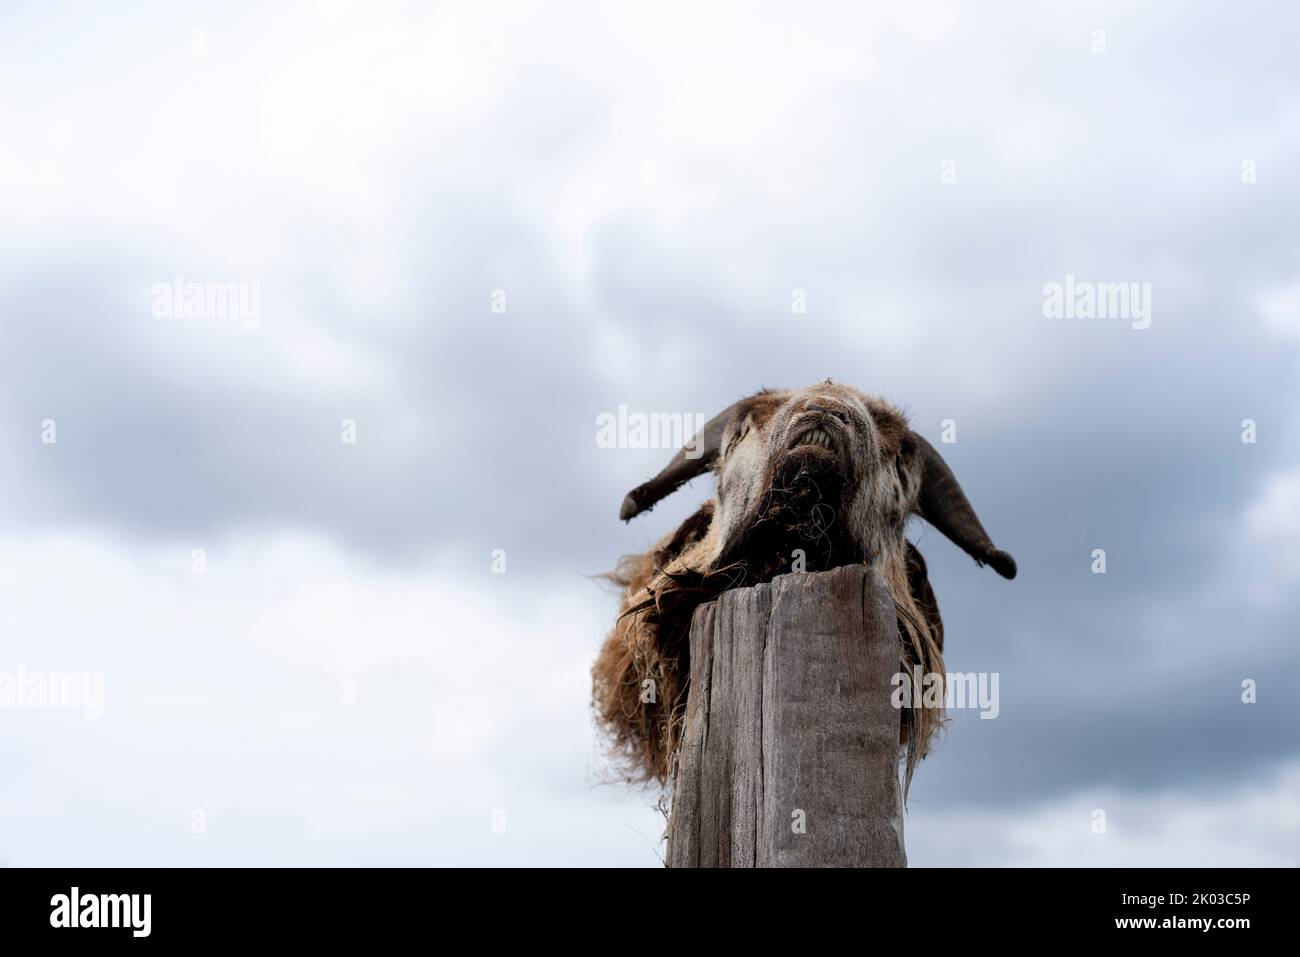 Goat head, carcass, wooden stake, Germany Stock Photo